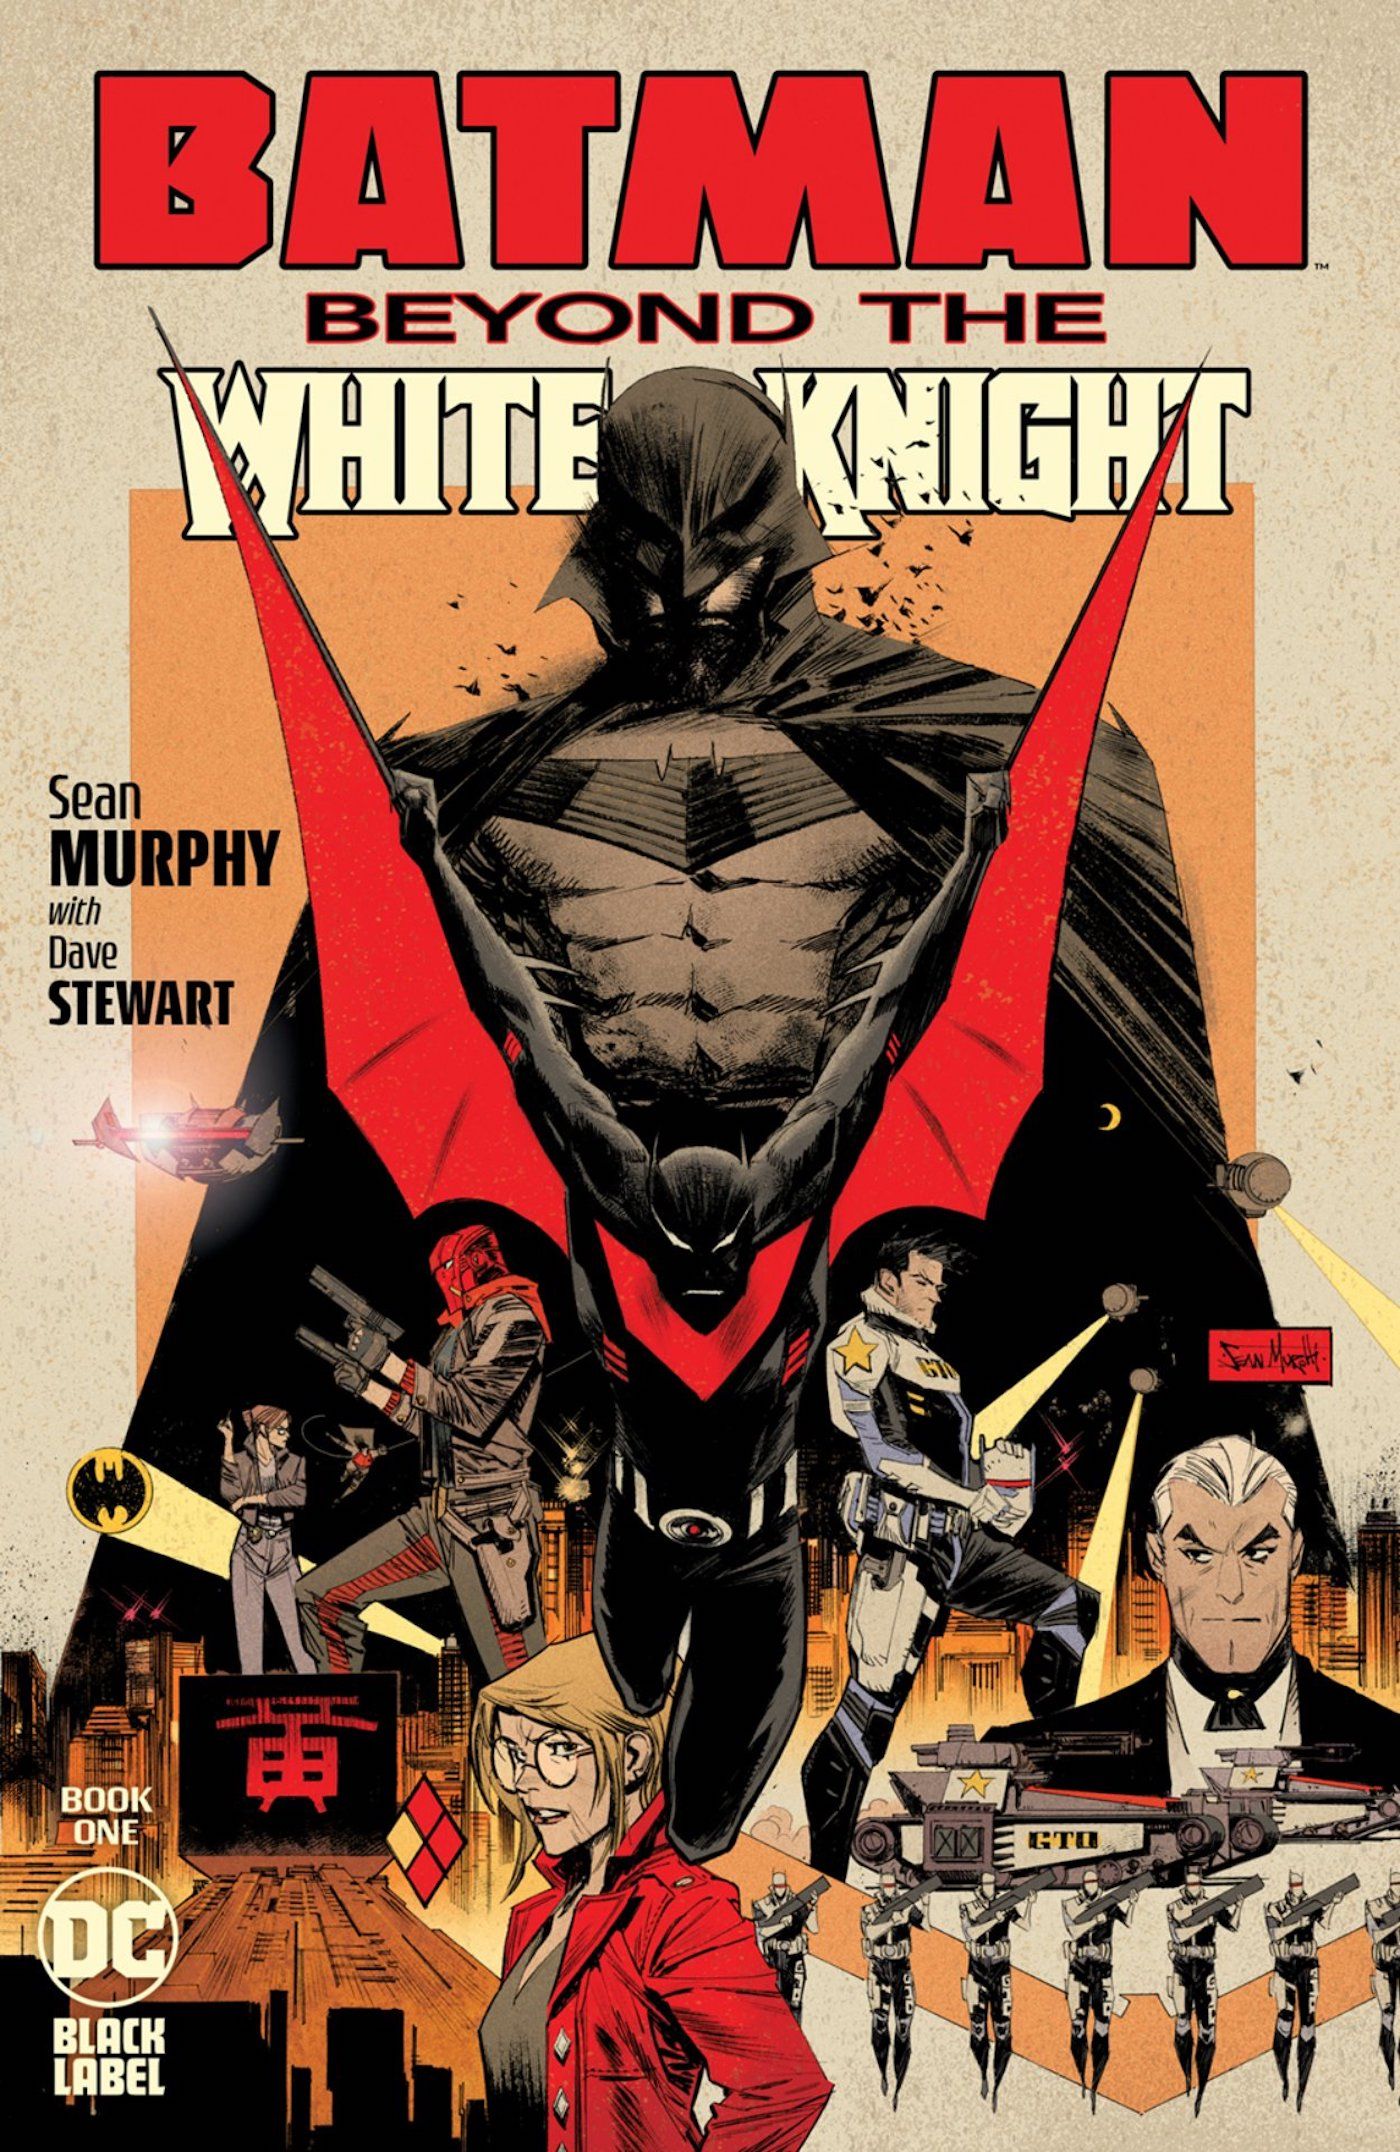 New Batman White Knight Series Focused on Batman Beyond Coming From DC